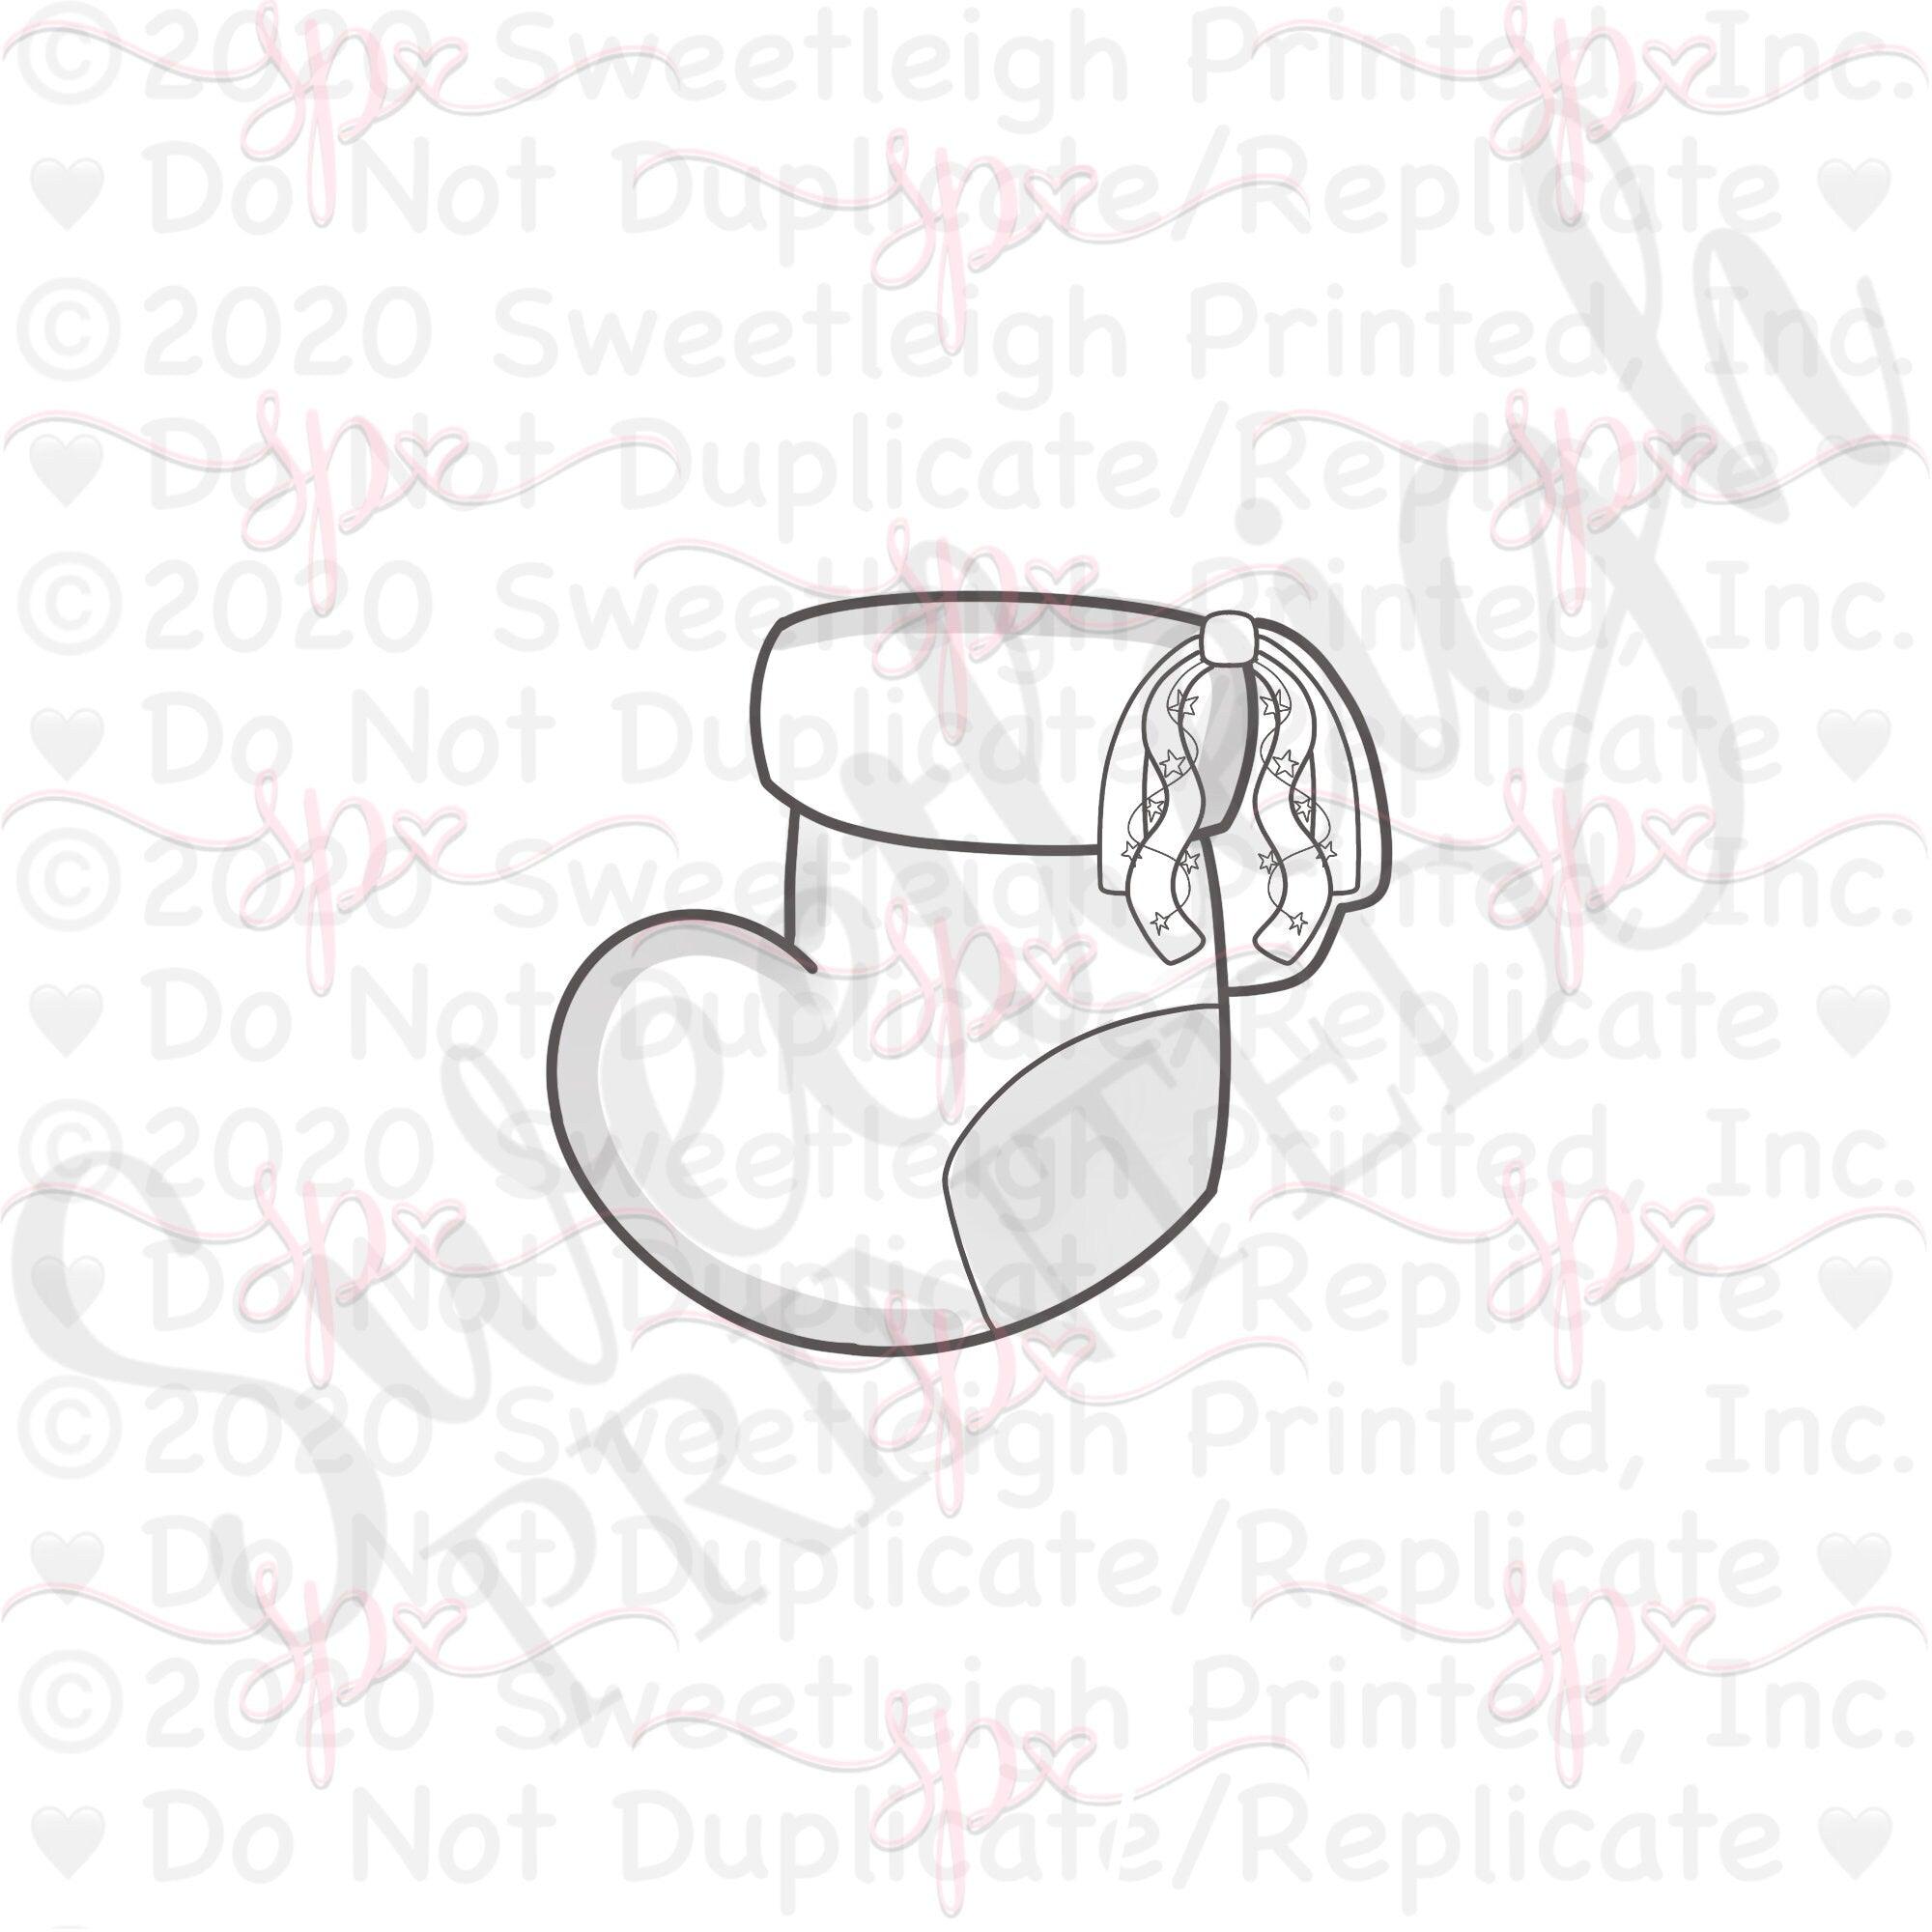 Streamer Stocking 1 Cookie Cutter - Sweetleigh 